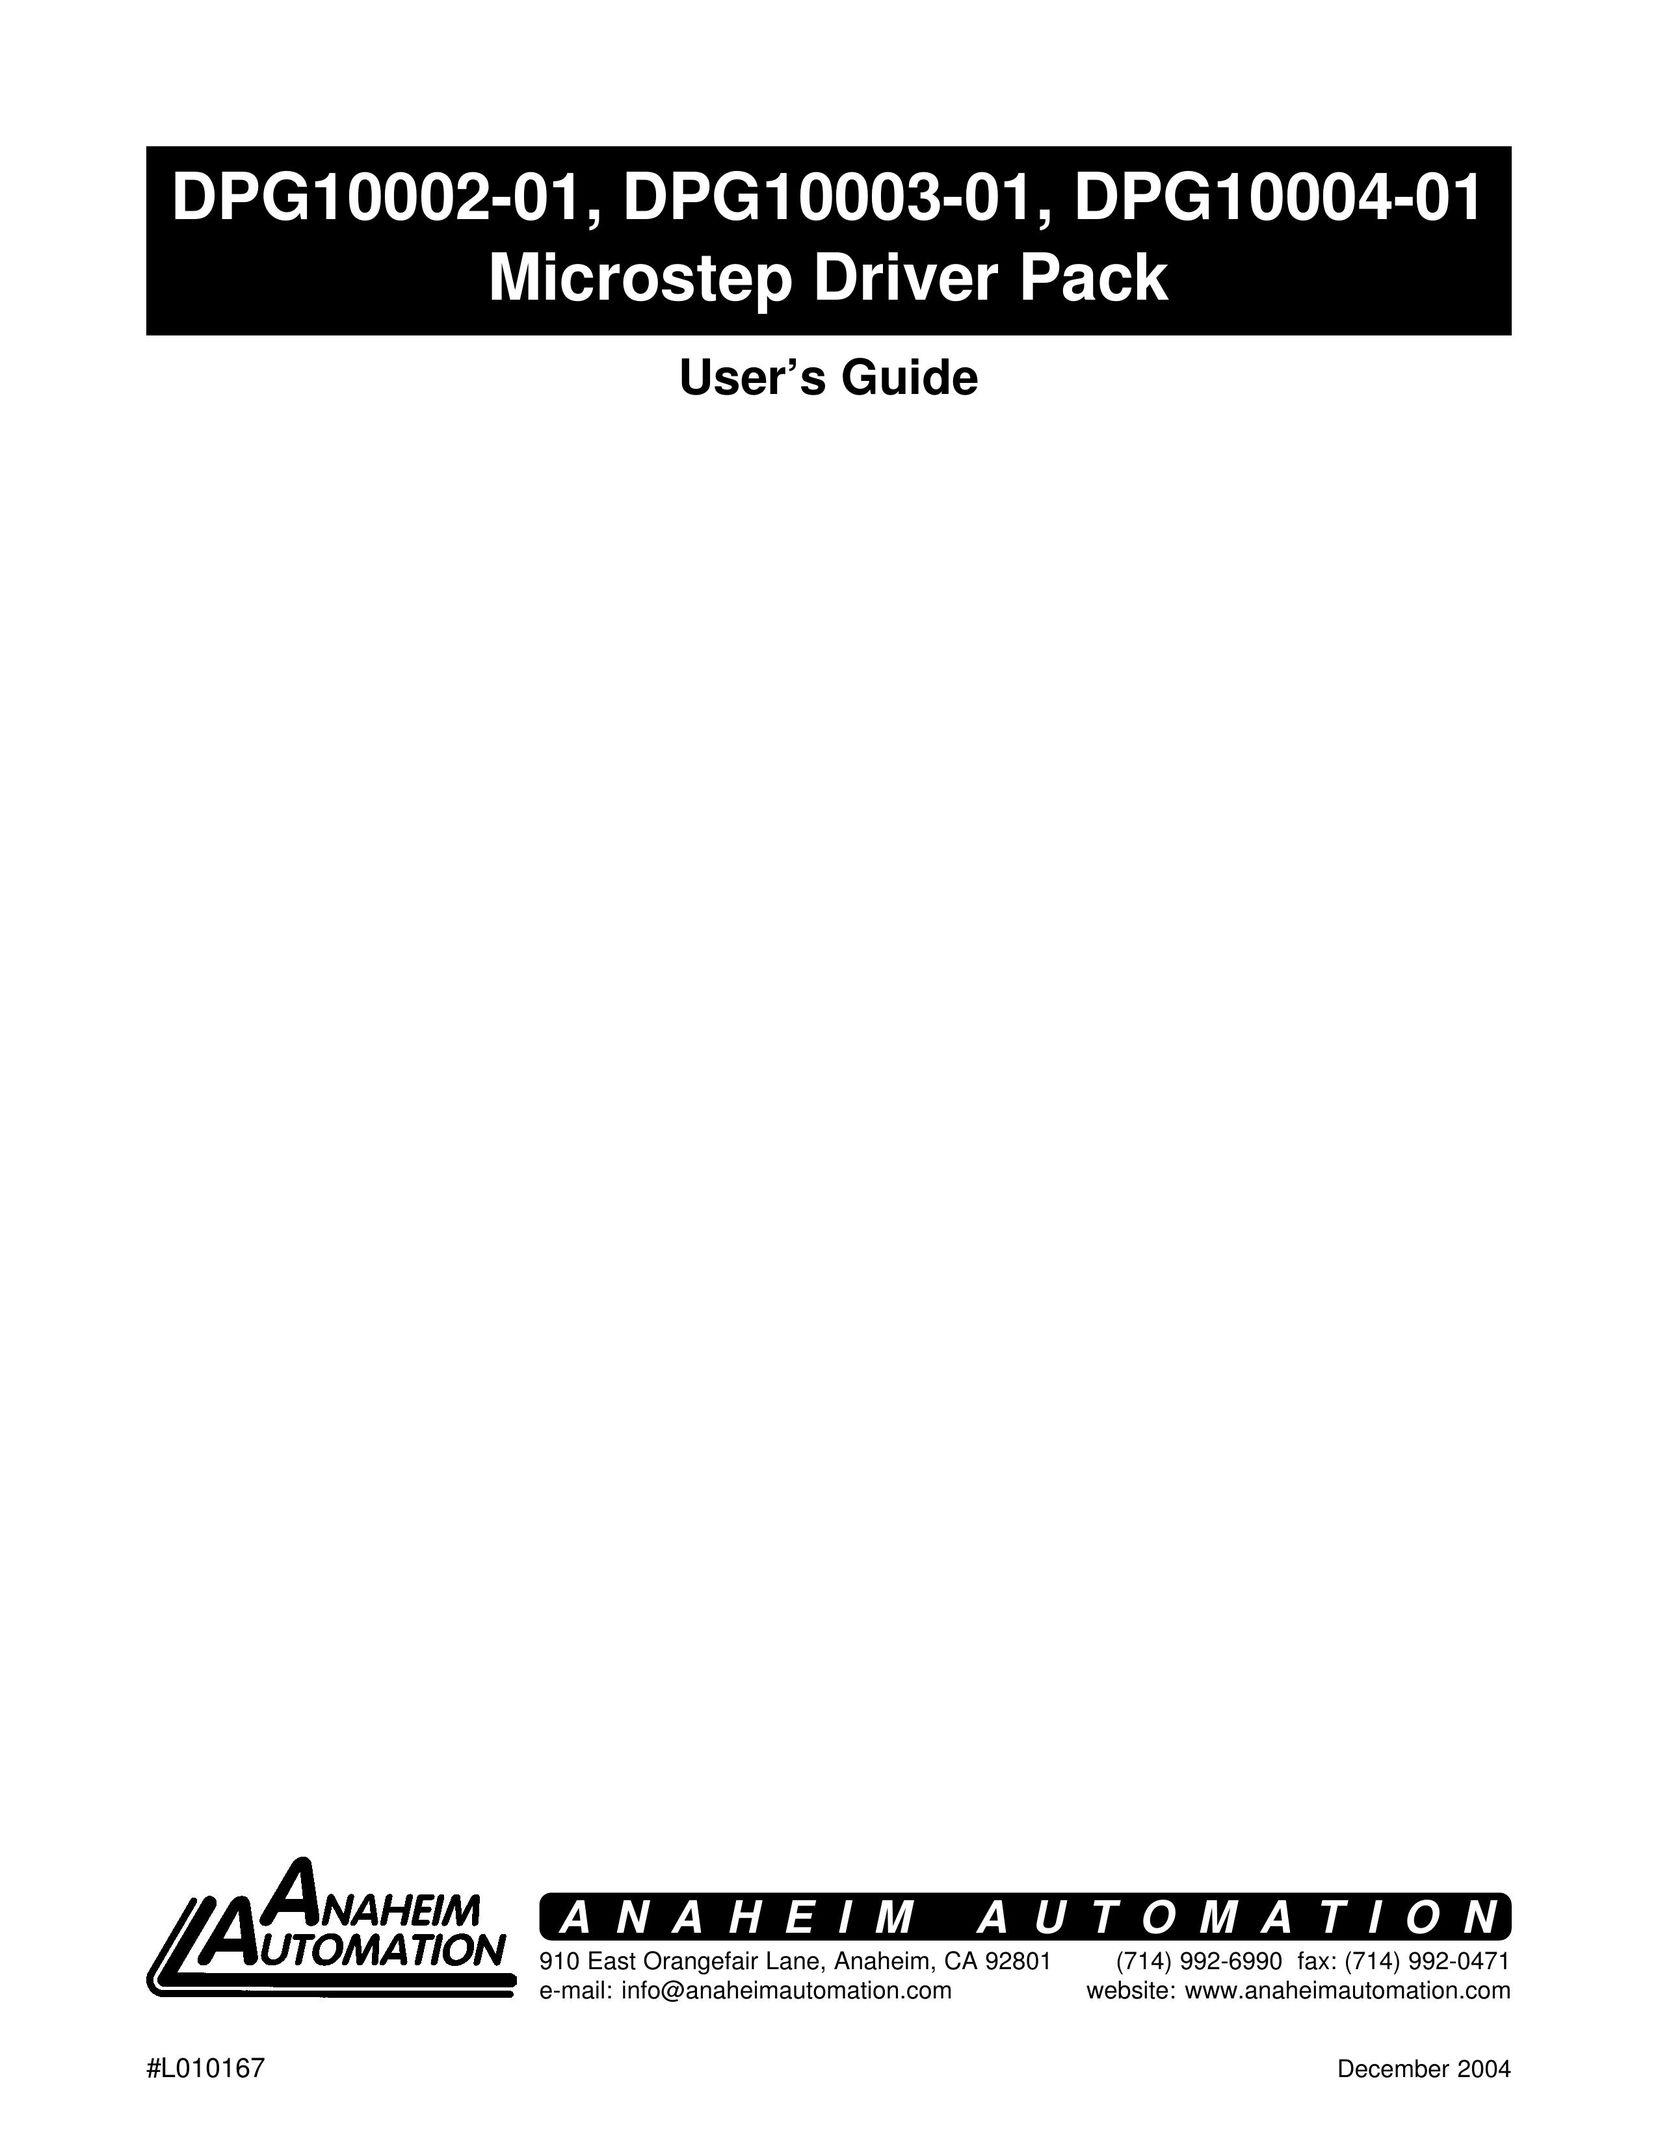 Anaheim DPG1004-01 Impact Driver User Manual (Page 1)